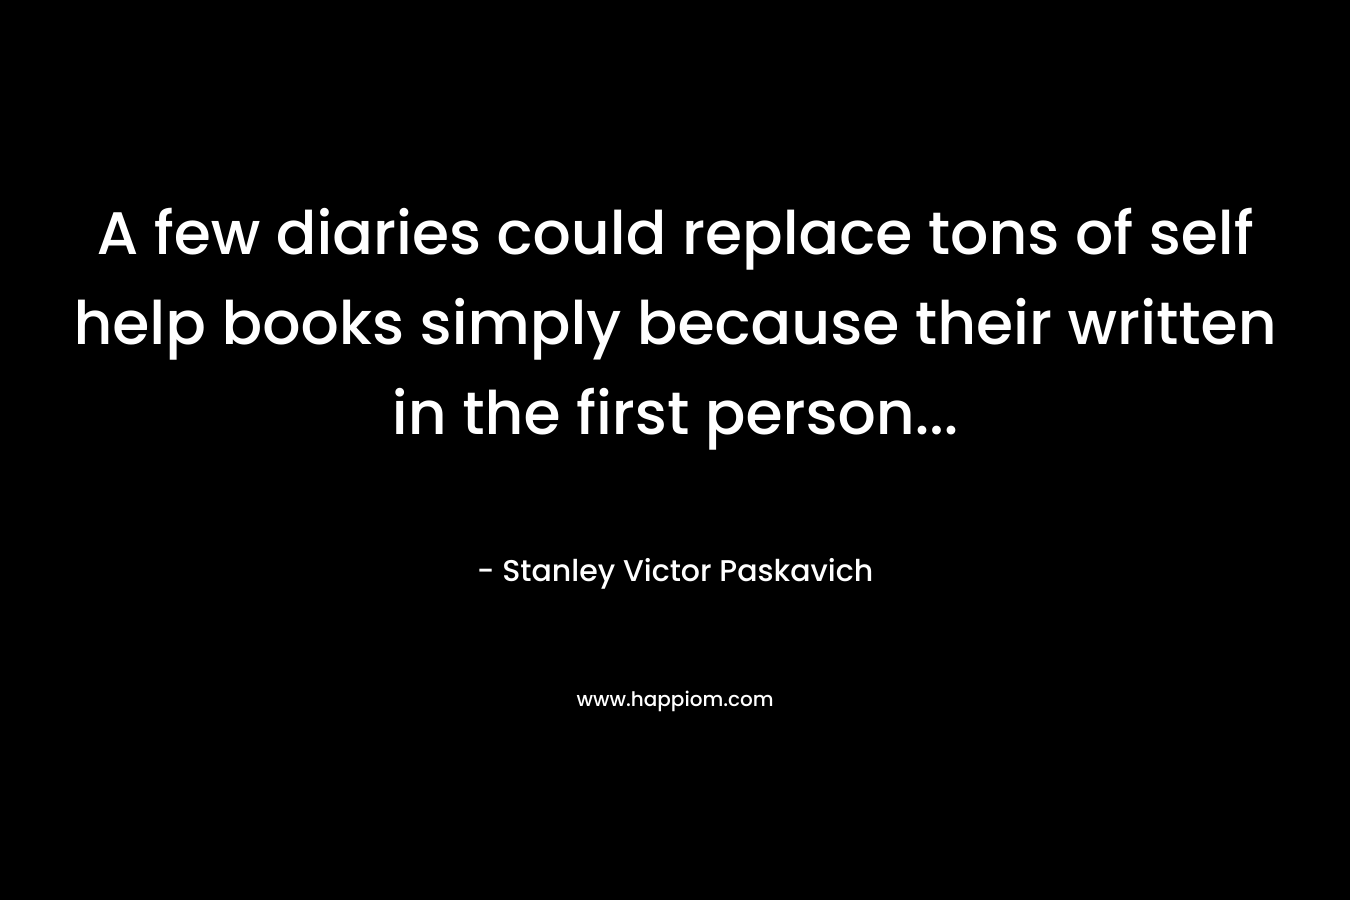 A few diaries could replace tons of self help books simply because their written in the first person...